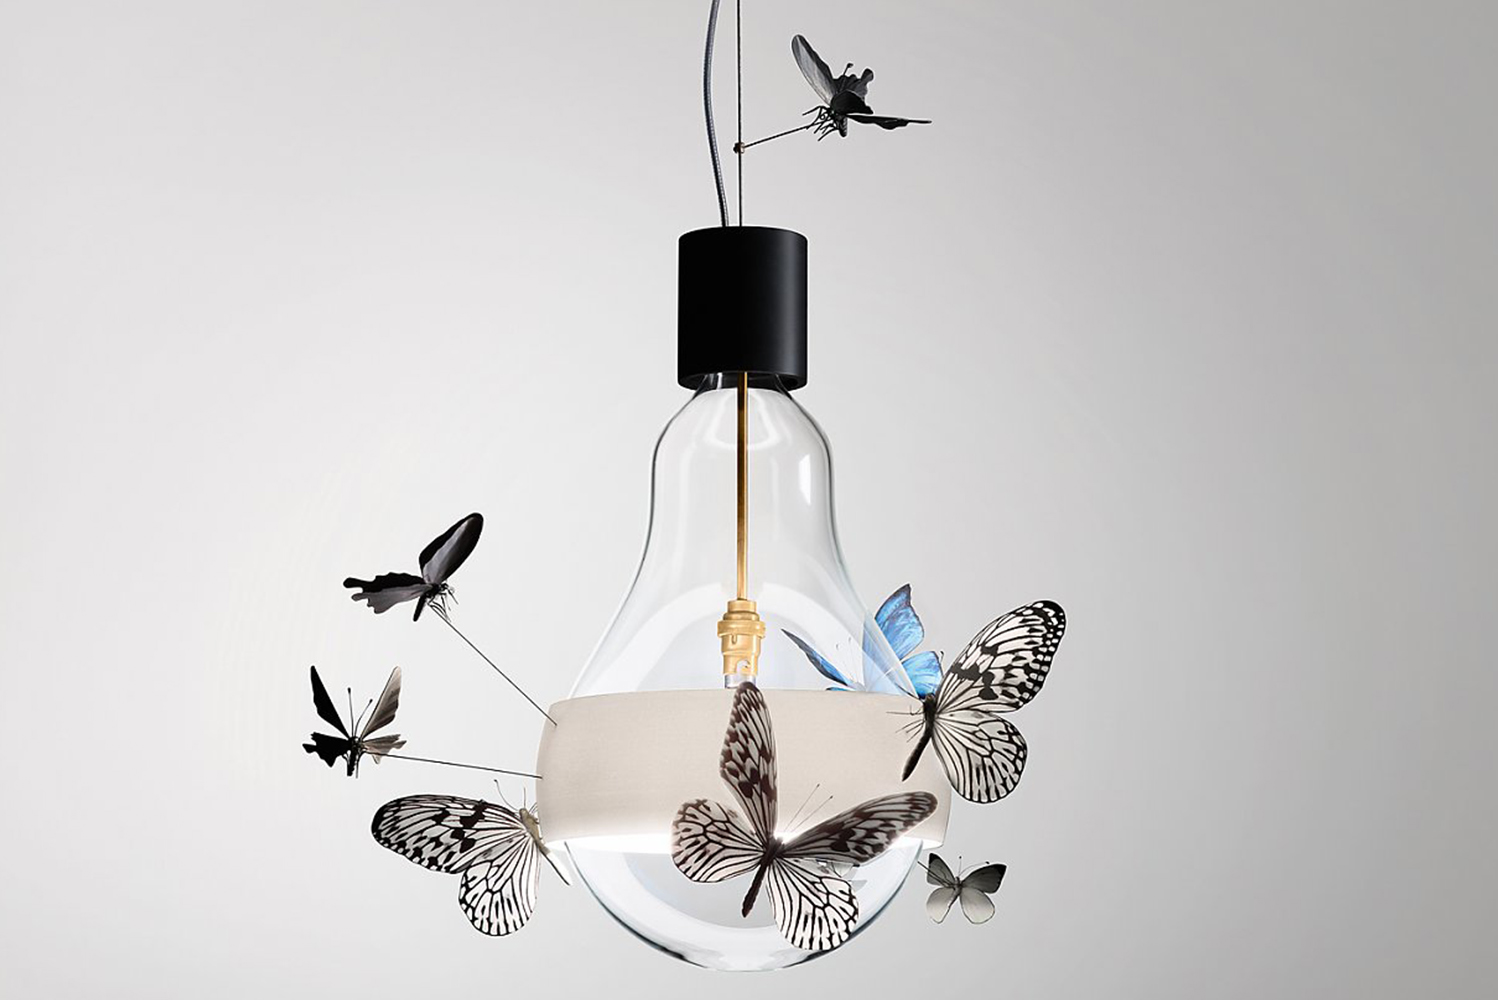 Designer Ingo Maurer launched the limited-edition Flatterby a hanging lamp with 10 handmade butterflies flitting around the 